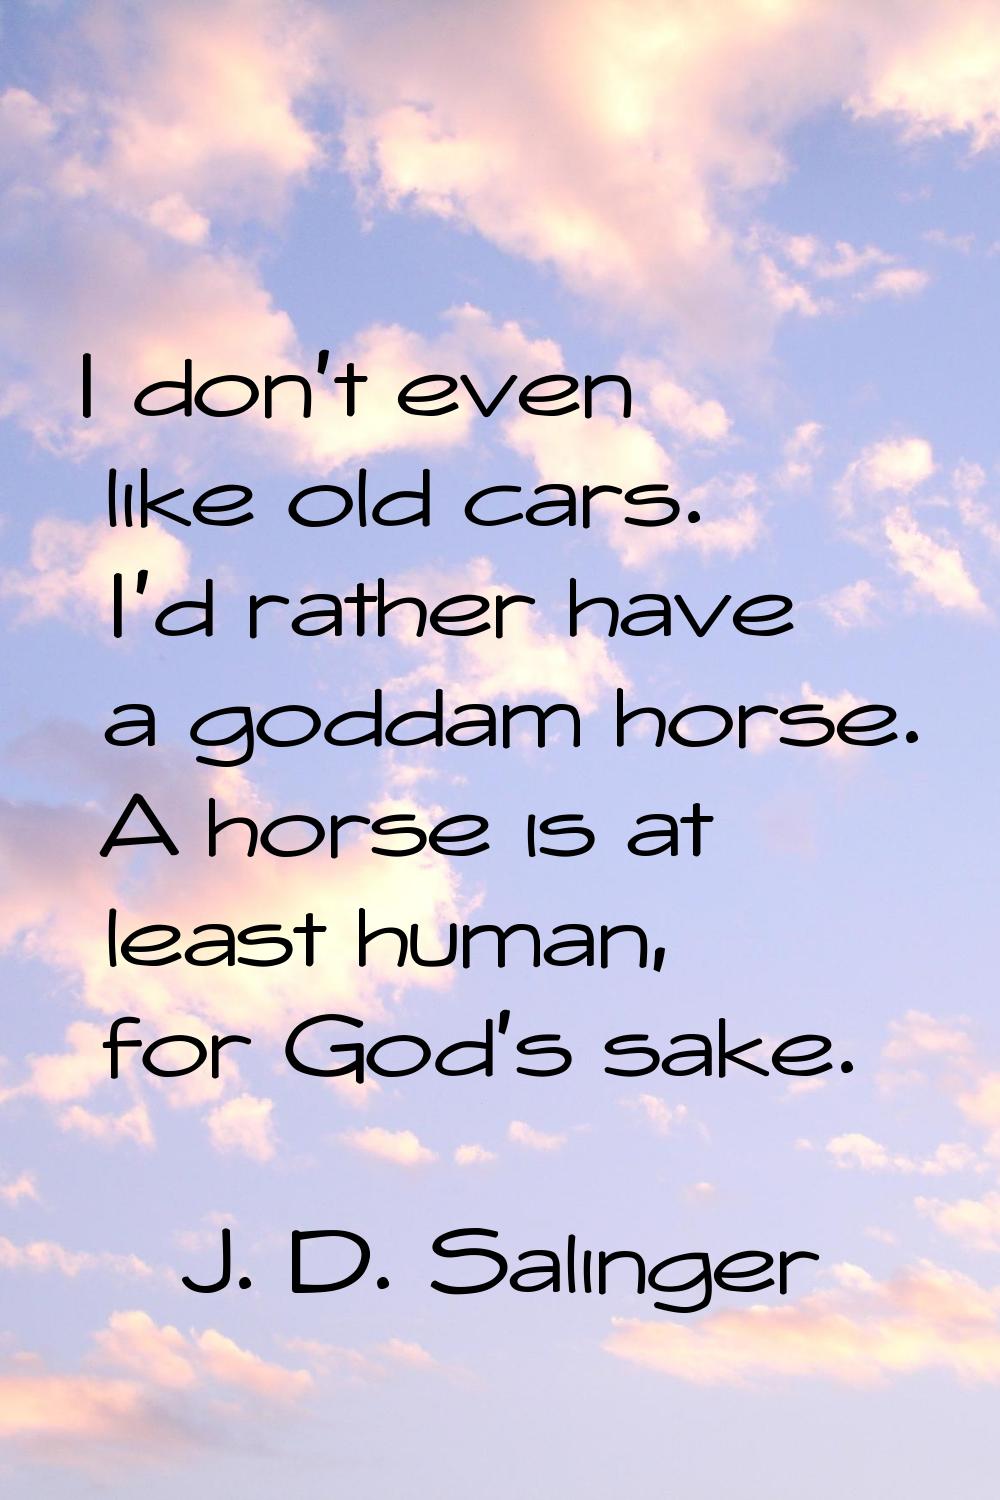 I don't even like old cars. I'd rather have a goddam horse. A horse is at least human, for God's sa